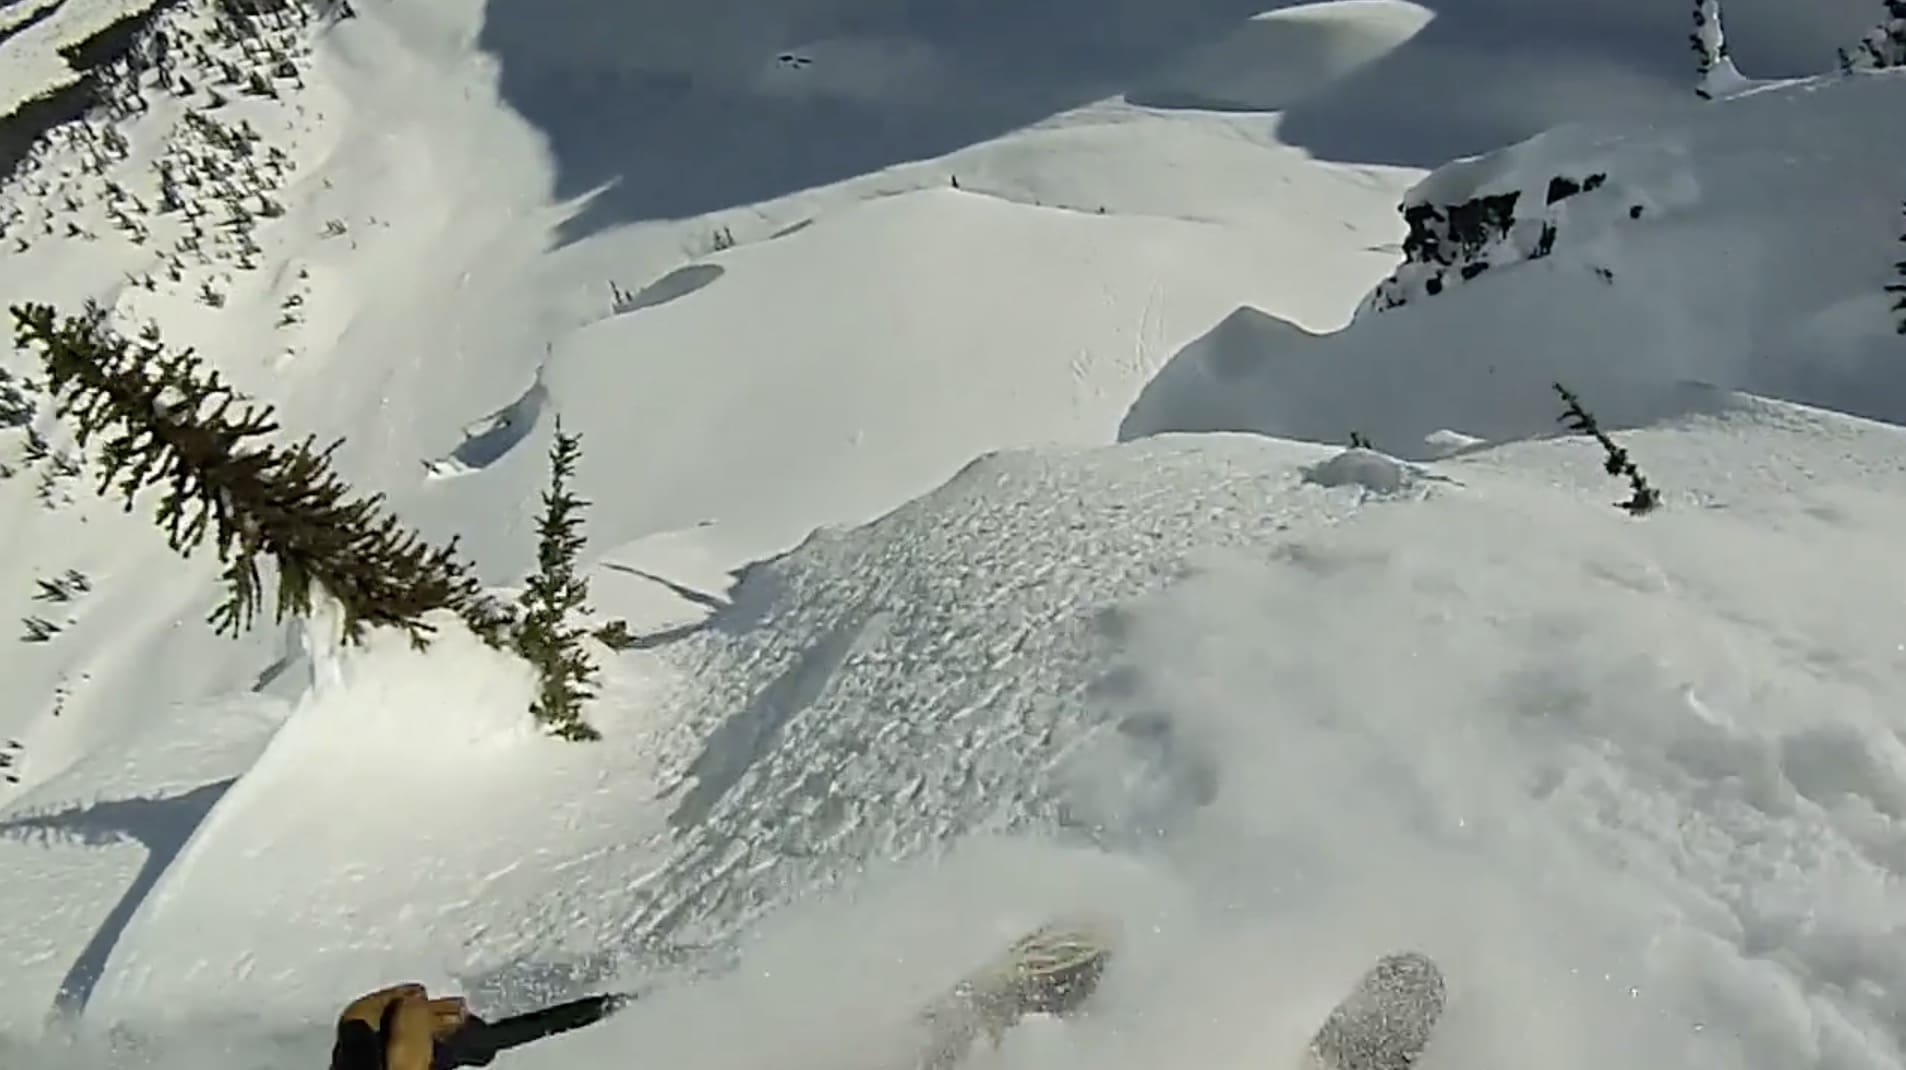 The Best Pov Ever Shot On A Contour Eric Hjorleifson Crushing